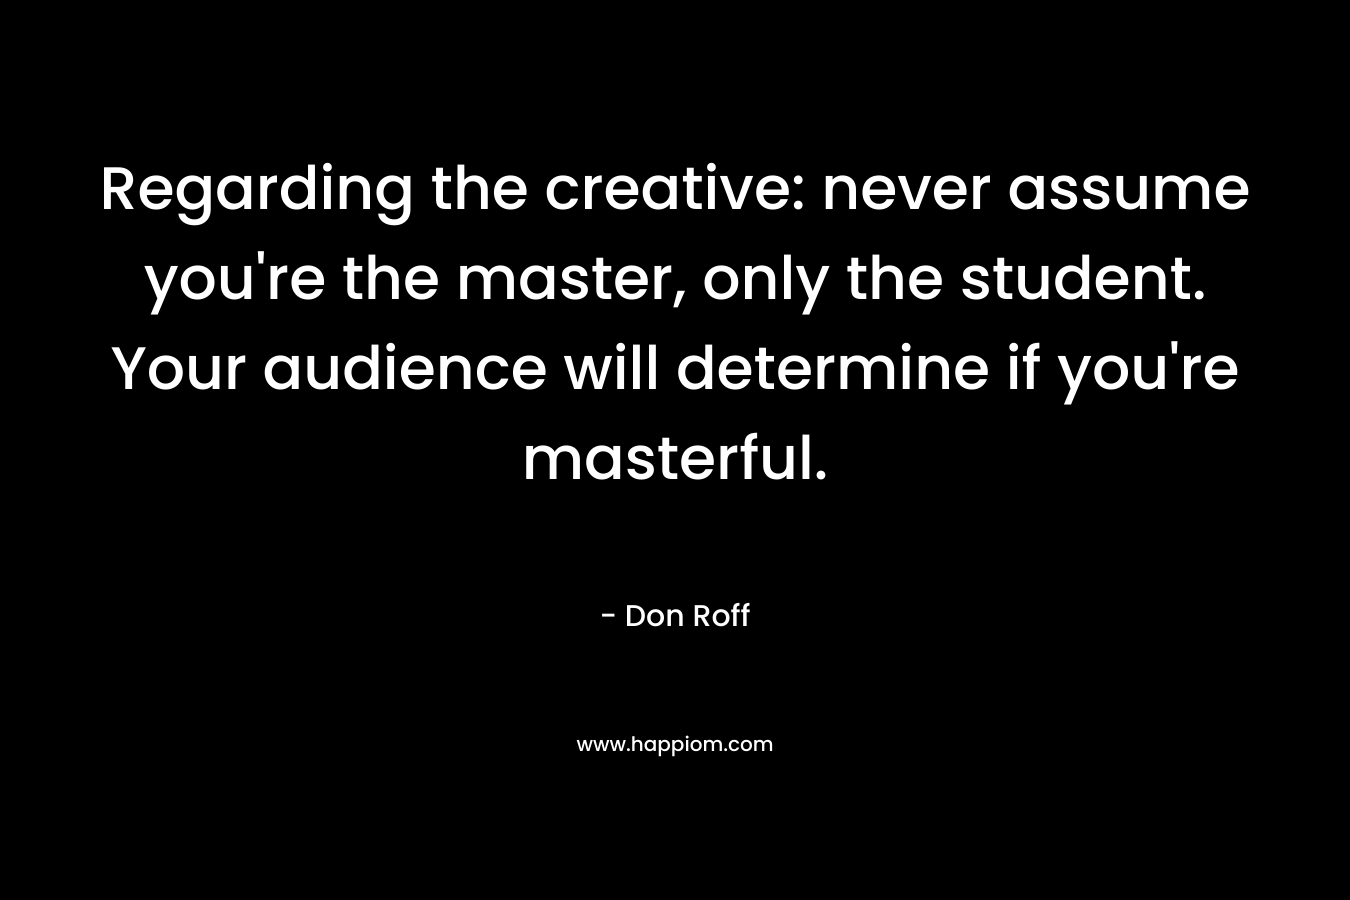 Regarding the creative: never assume you’re the master, only the student. Your audience will determine if you’re masterful. – Don Roff